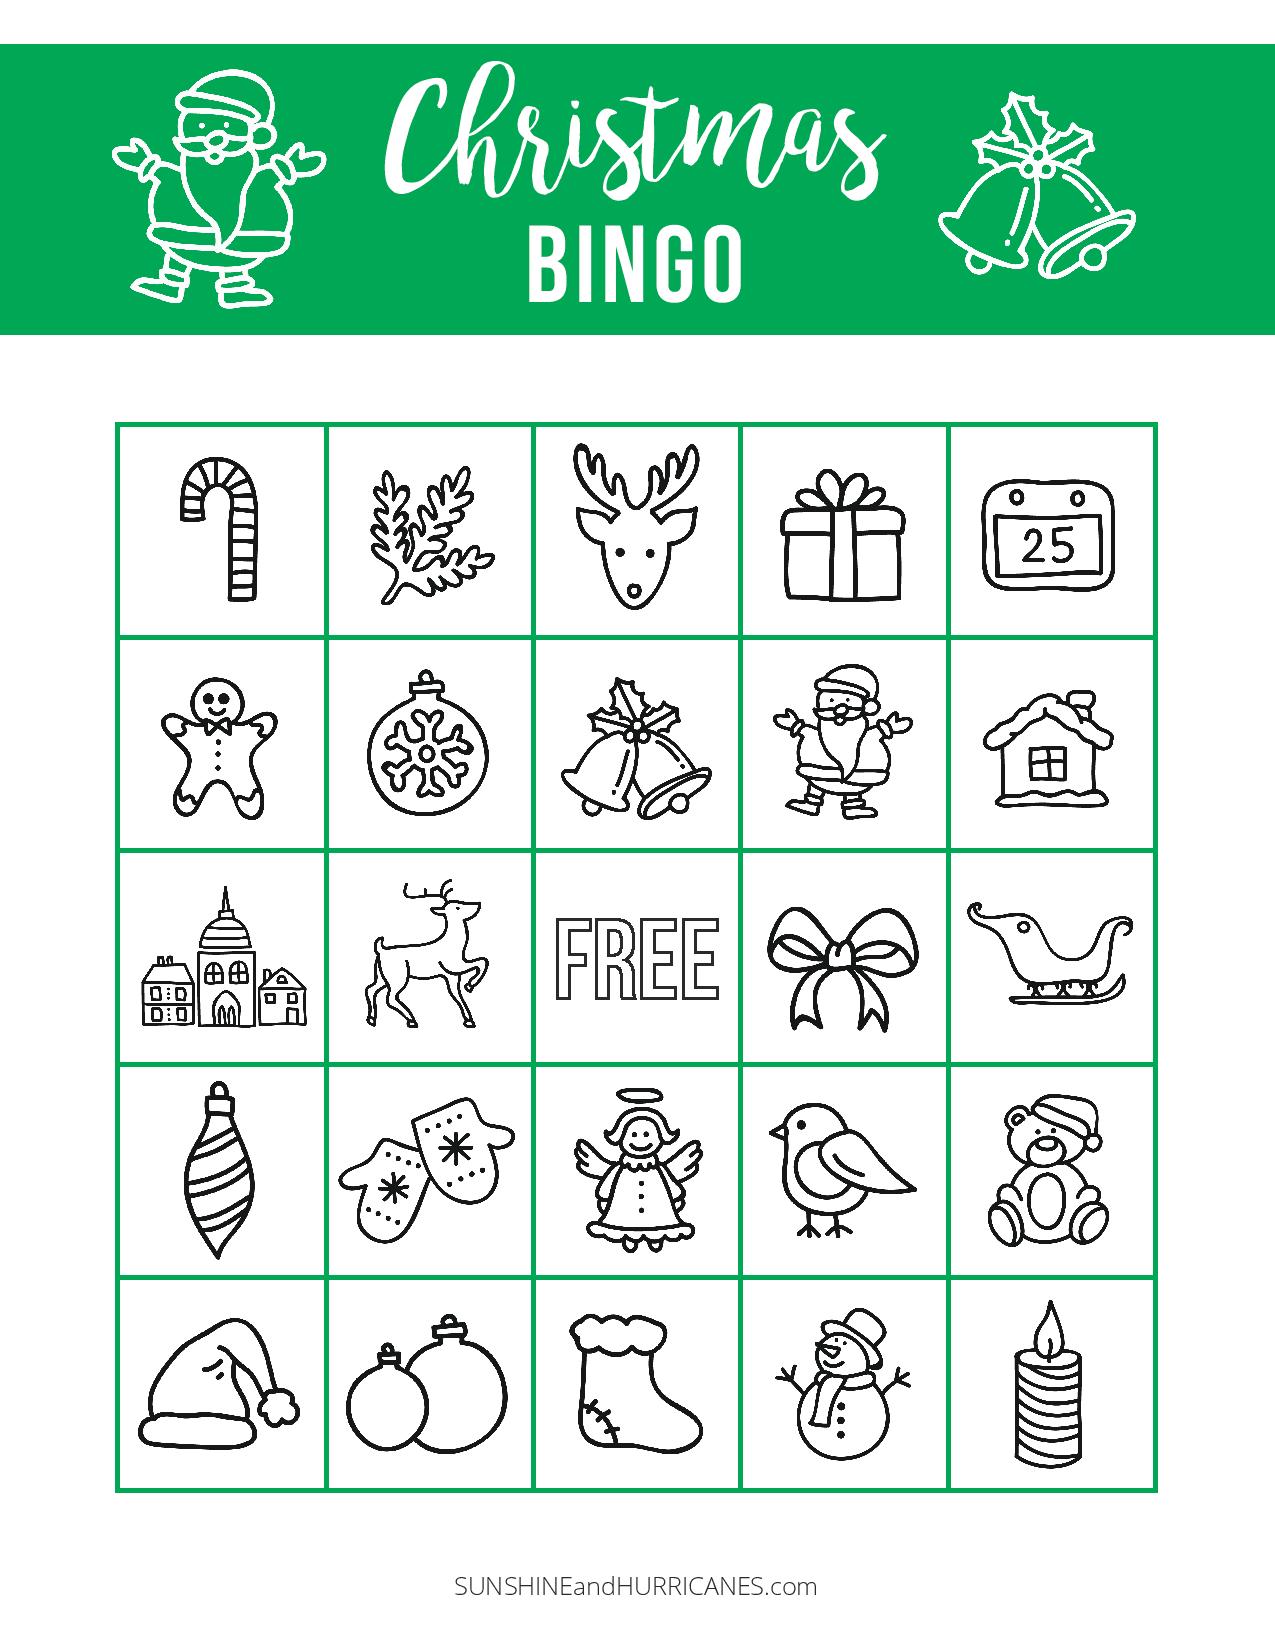 holiday-bingo-card-printable-for-kids-we-re-parents